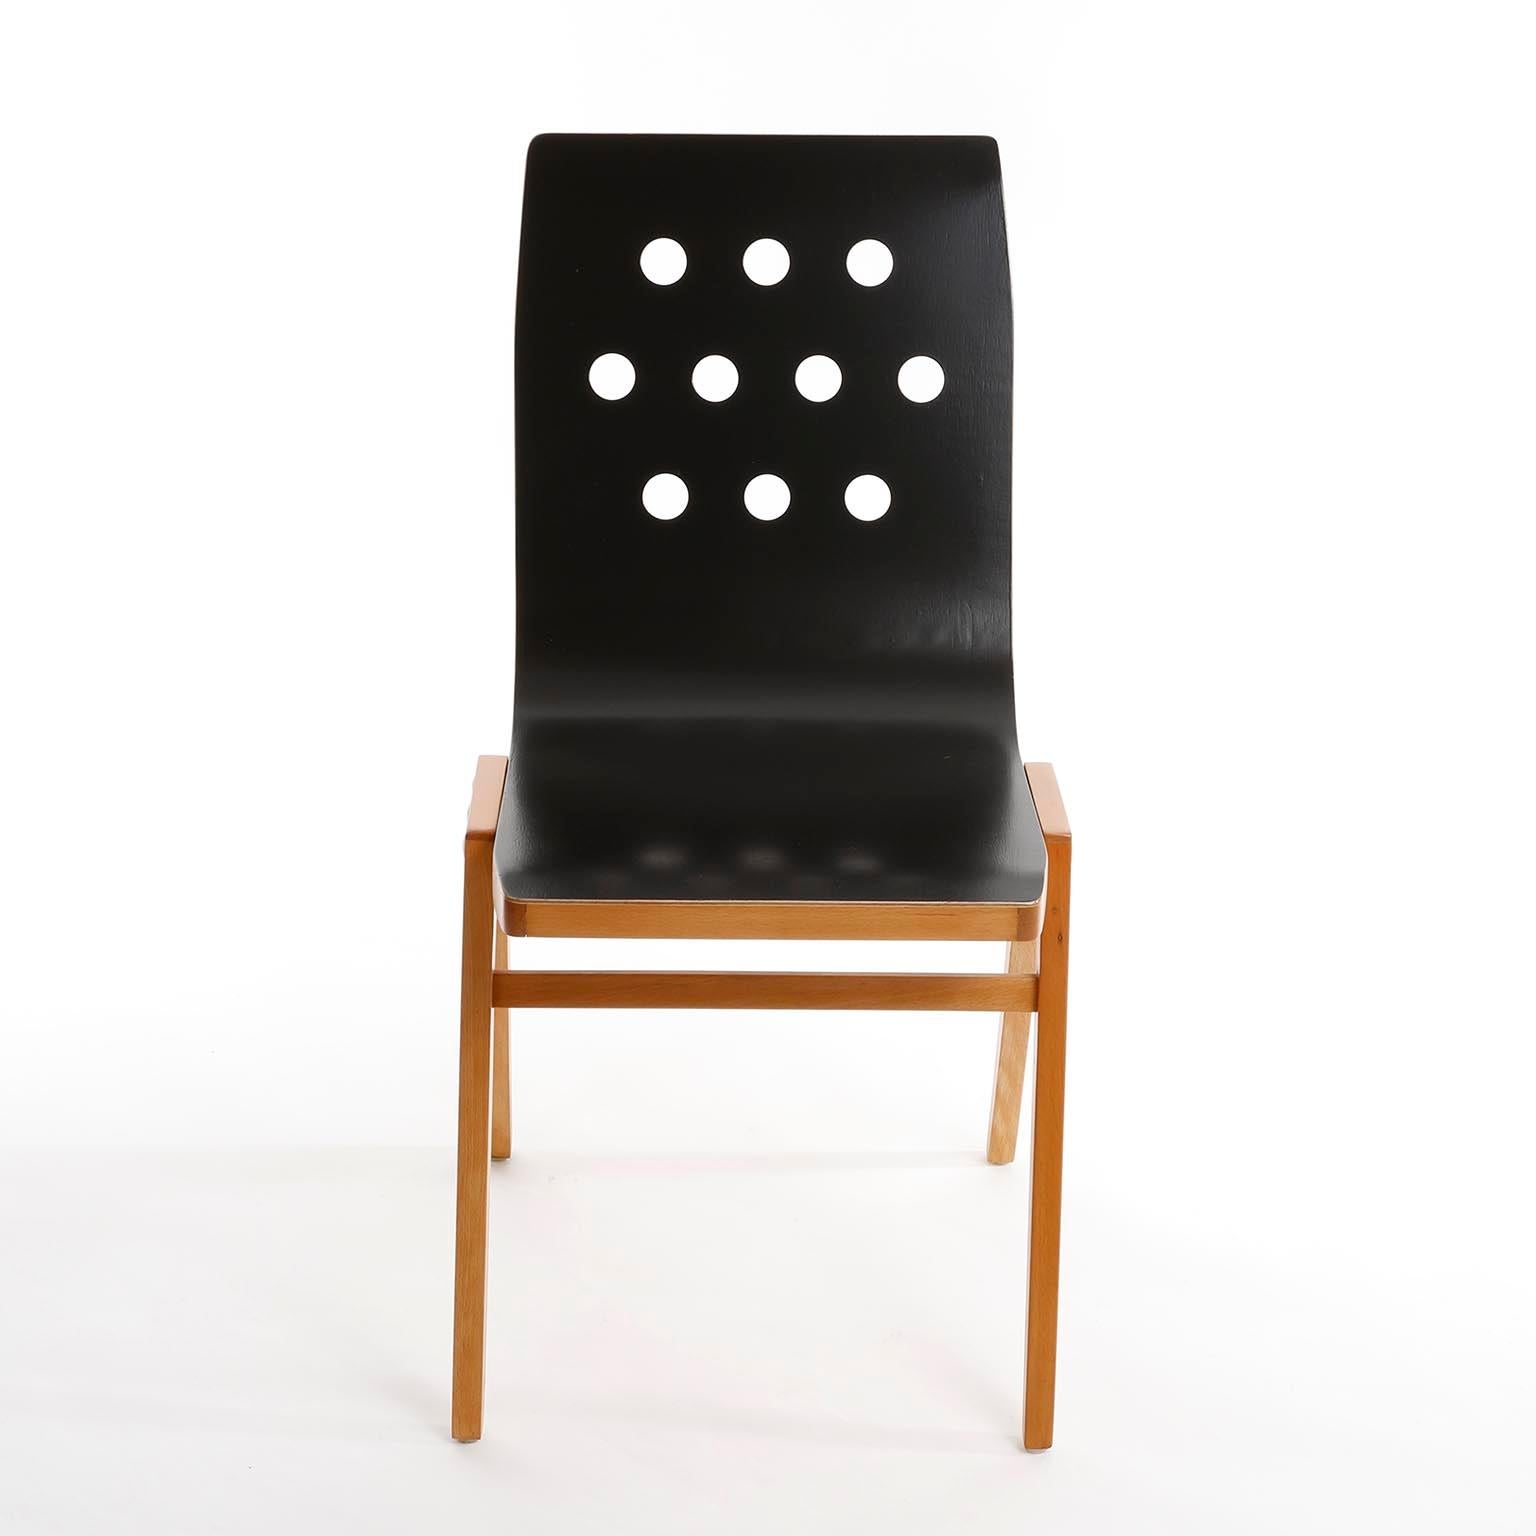 Mid-20th Century Roland Rainer, Set of Eight Stacking Chairs, Black Beech Wood, Vienna, 1950s